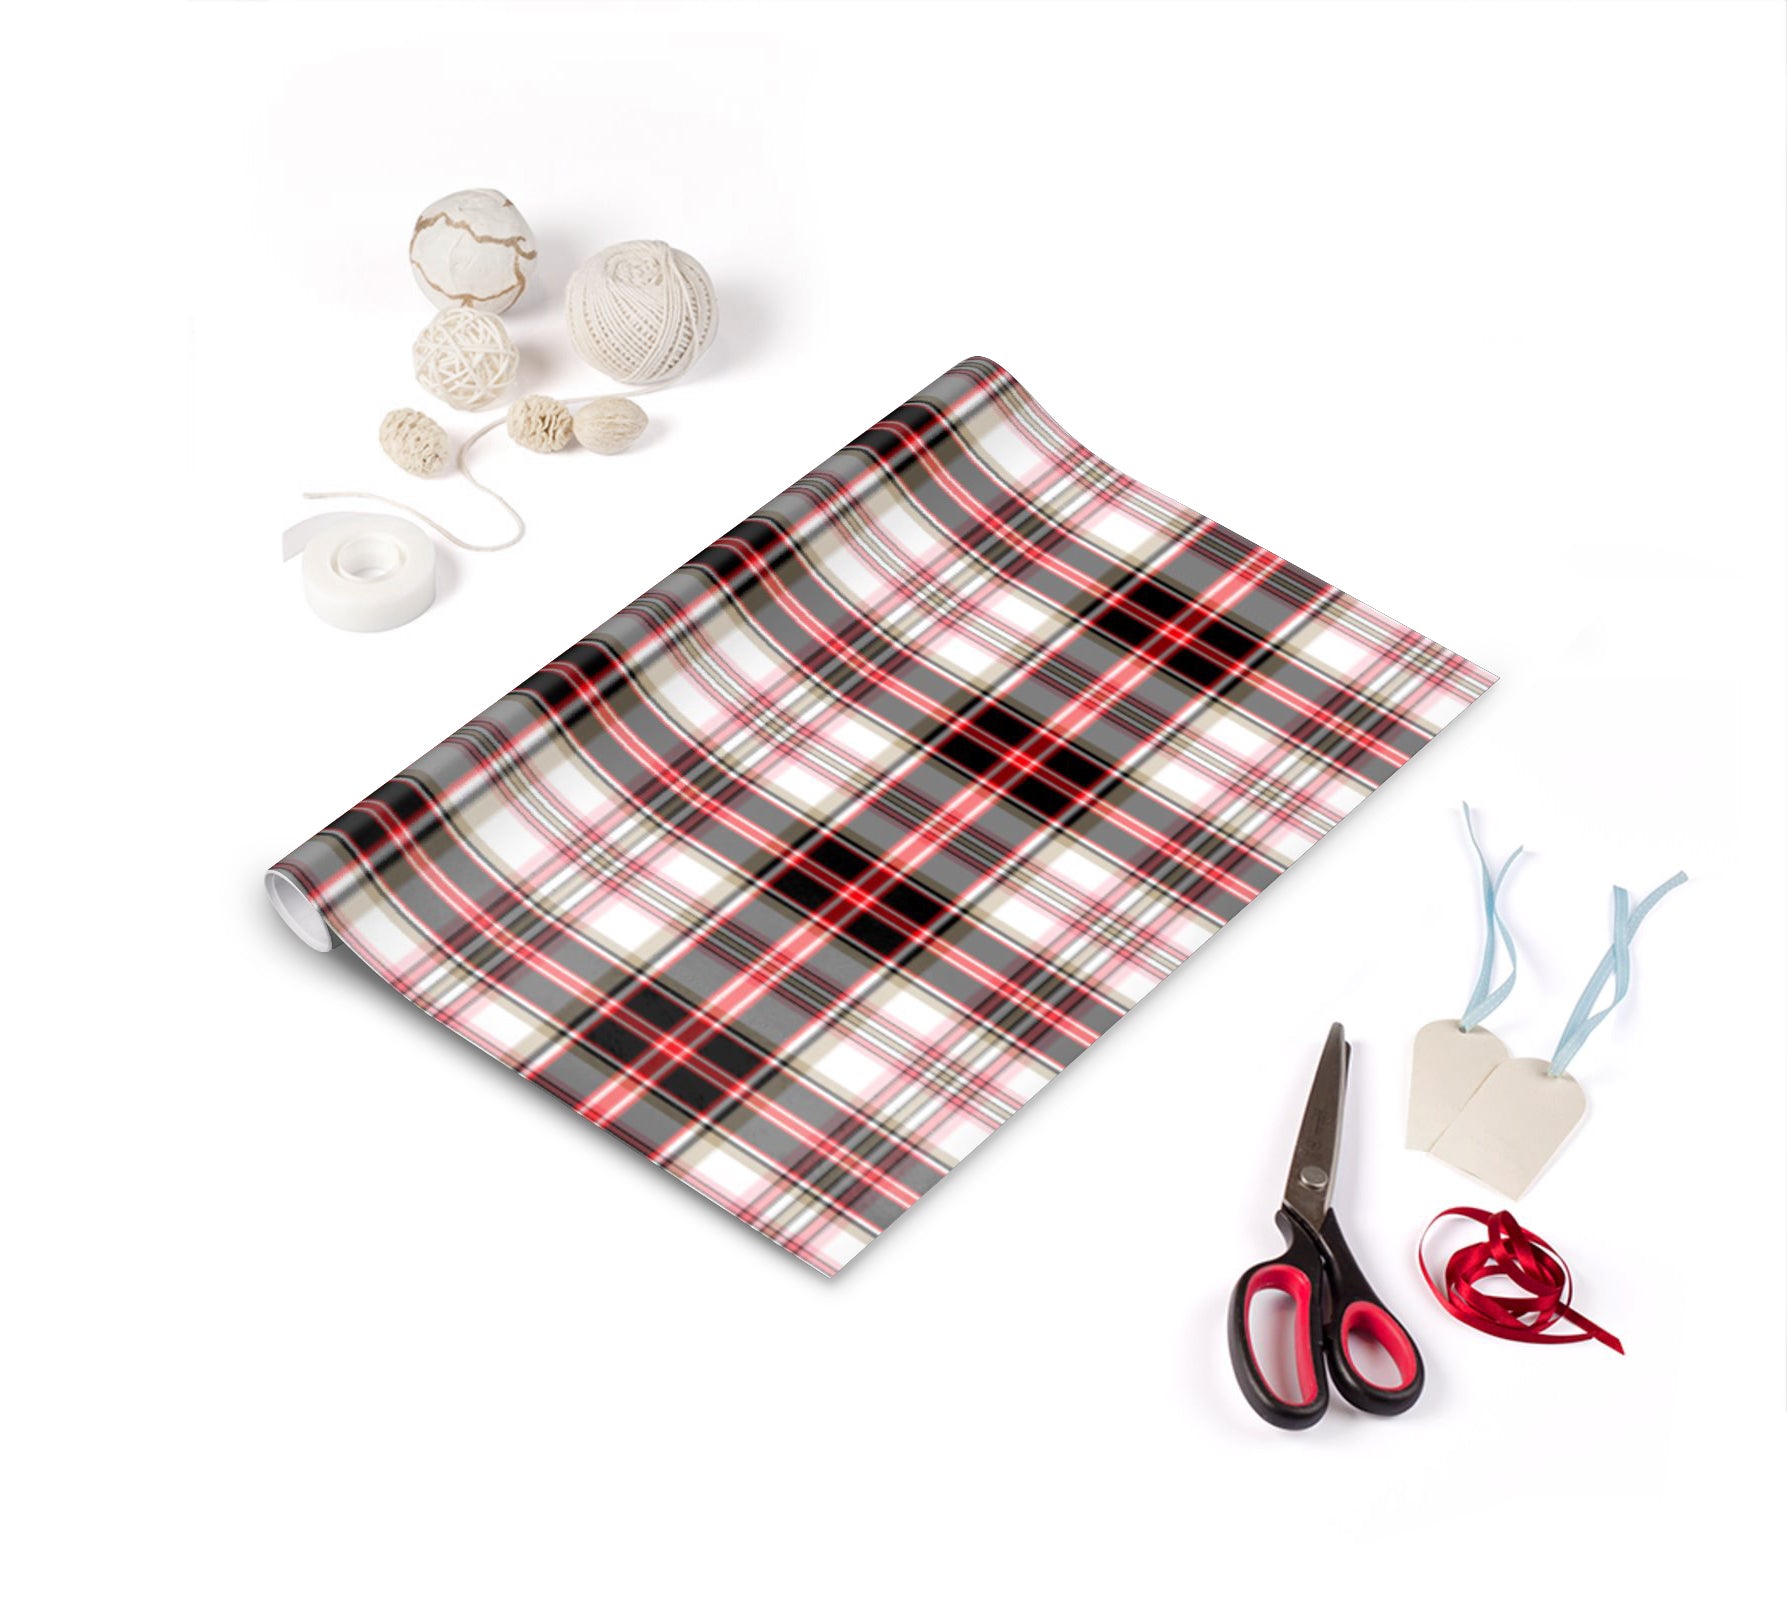 Designer wrapping paper exclusive to the Tartan Artisan ®. Featuring the tartan... Puccini's Madama Butterfly, created in 2012 commemorating Giacomo Puccini's heart-breaking opera Madama Butterfly